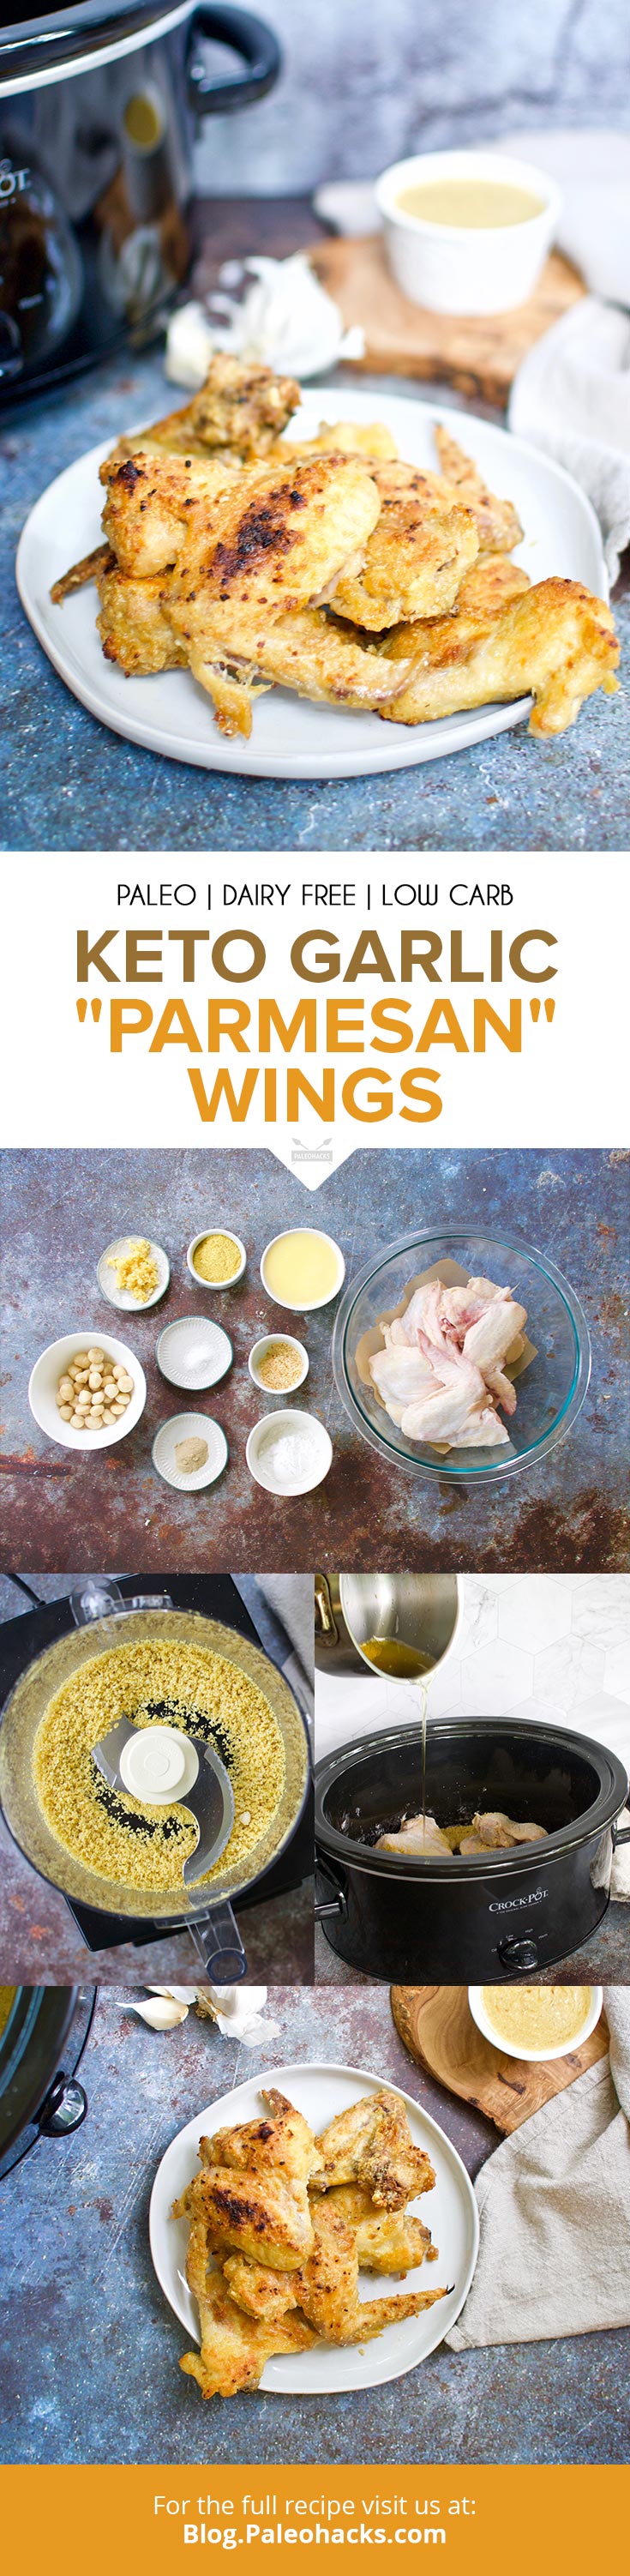 Slow cook wings to fall-off-the-bone perfection in a savory paleo and keto garlic parmesan sauce. You'll never guess how we make parmesan Paleo and Keto.